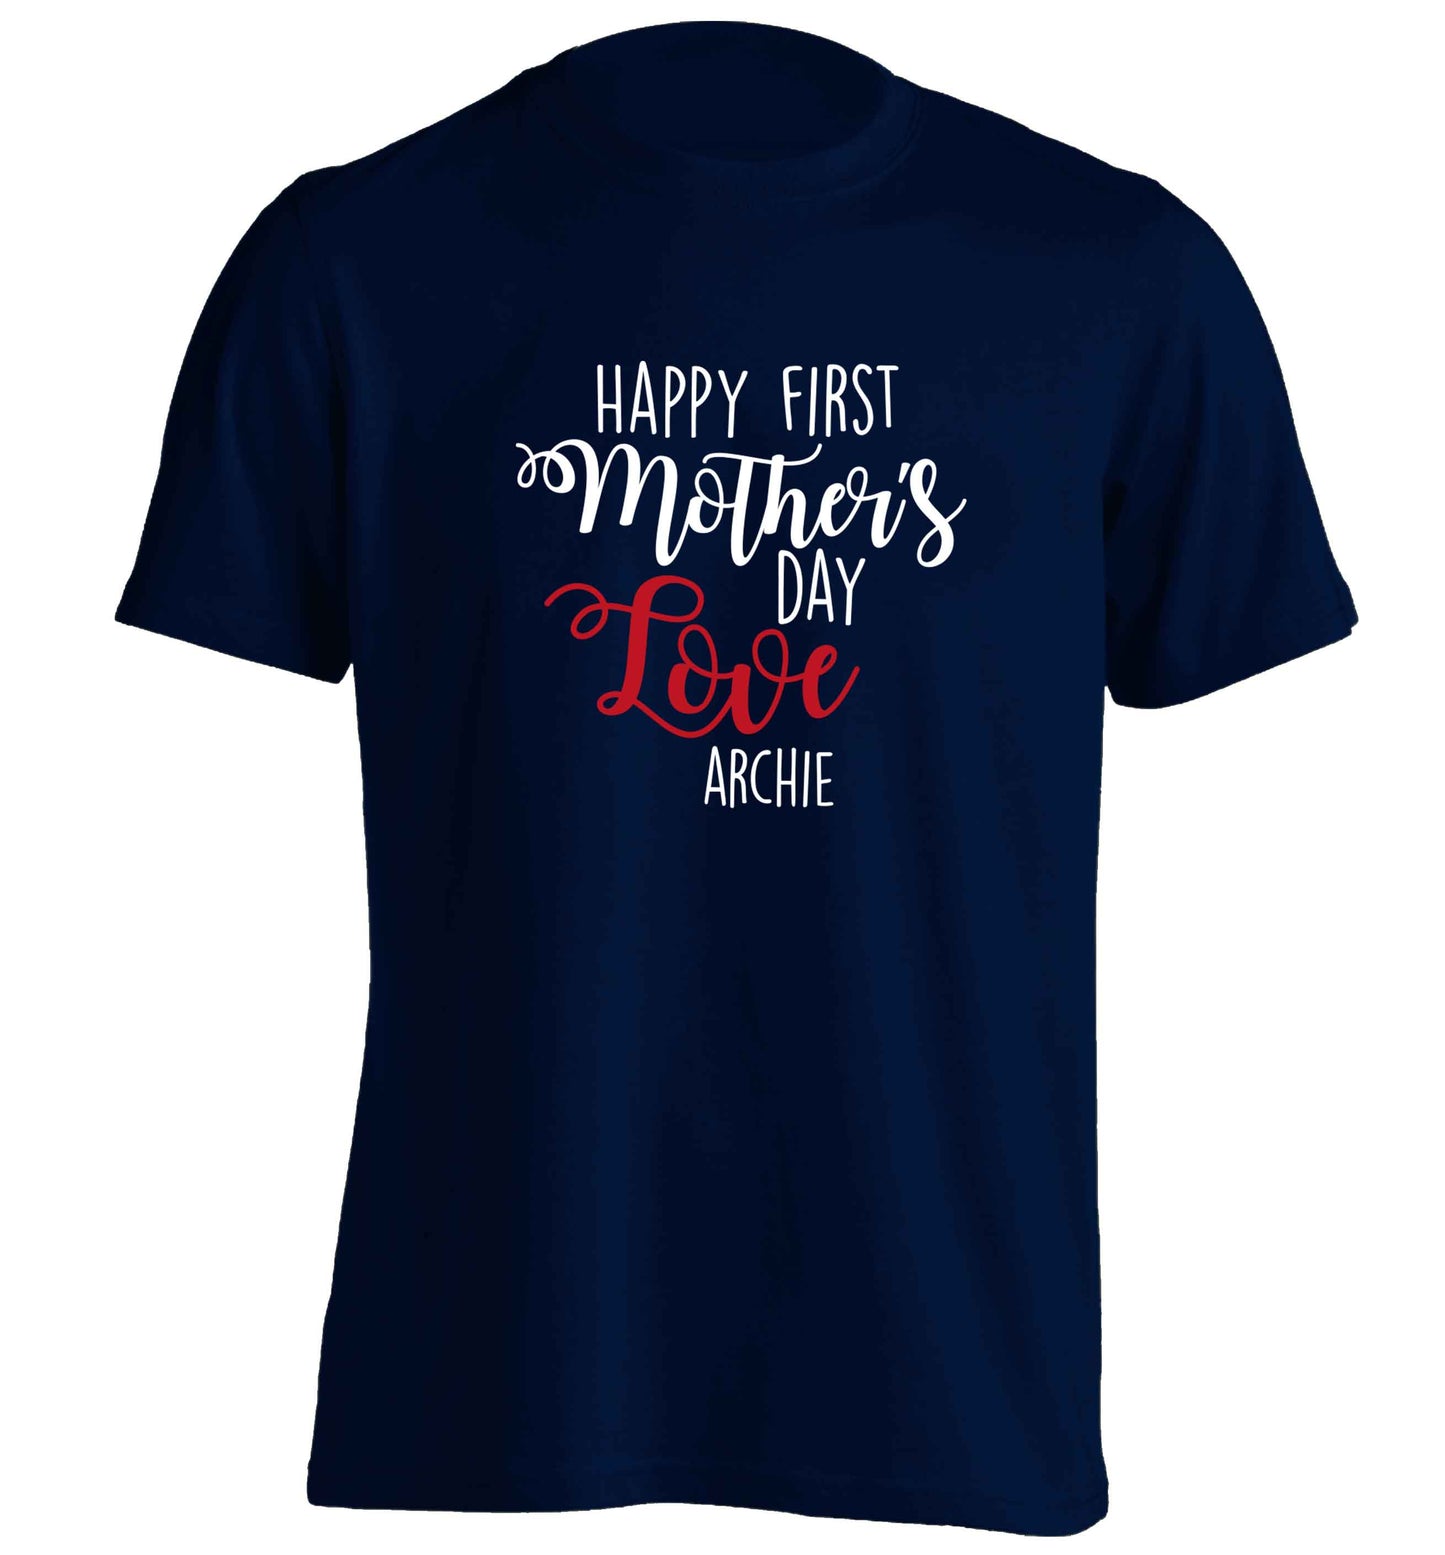 Personalised happy first mother's day love adults unisex navy Tshirt 2XL